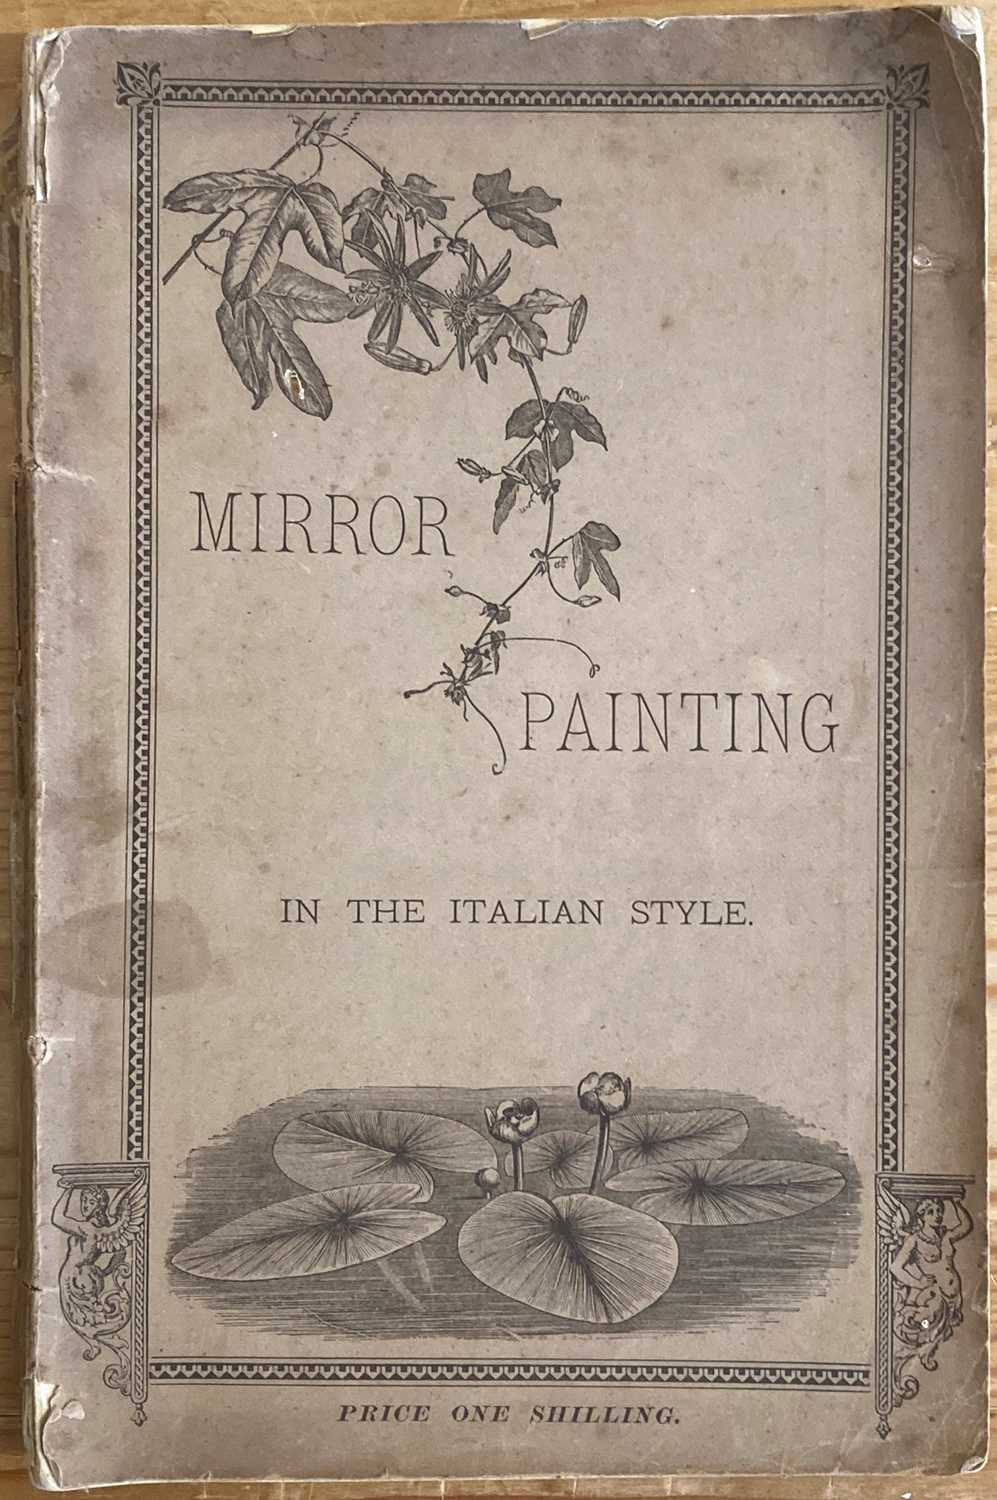 Lot 284 - Sharp-Ayres (H. M. E., Mrs.), Mirror Painting in the Italian style, 1886